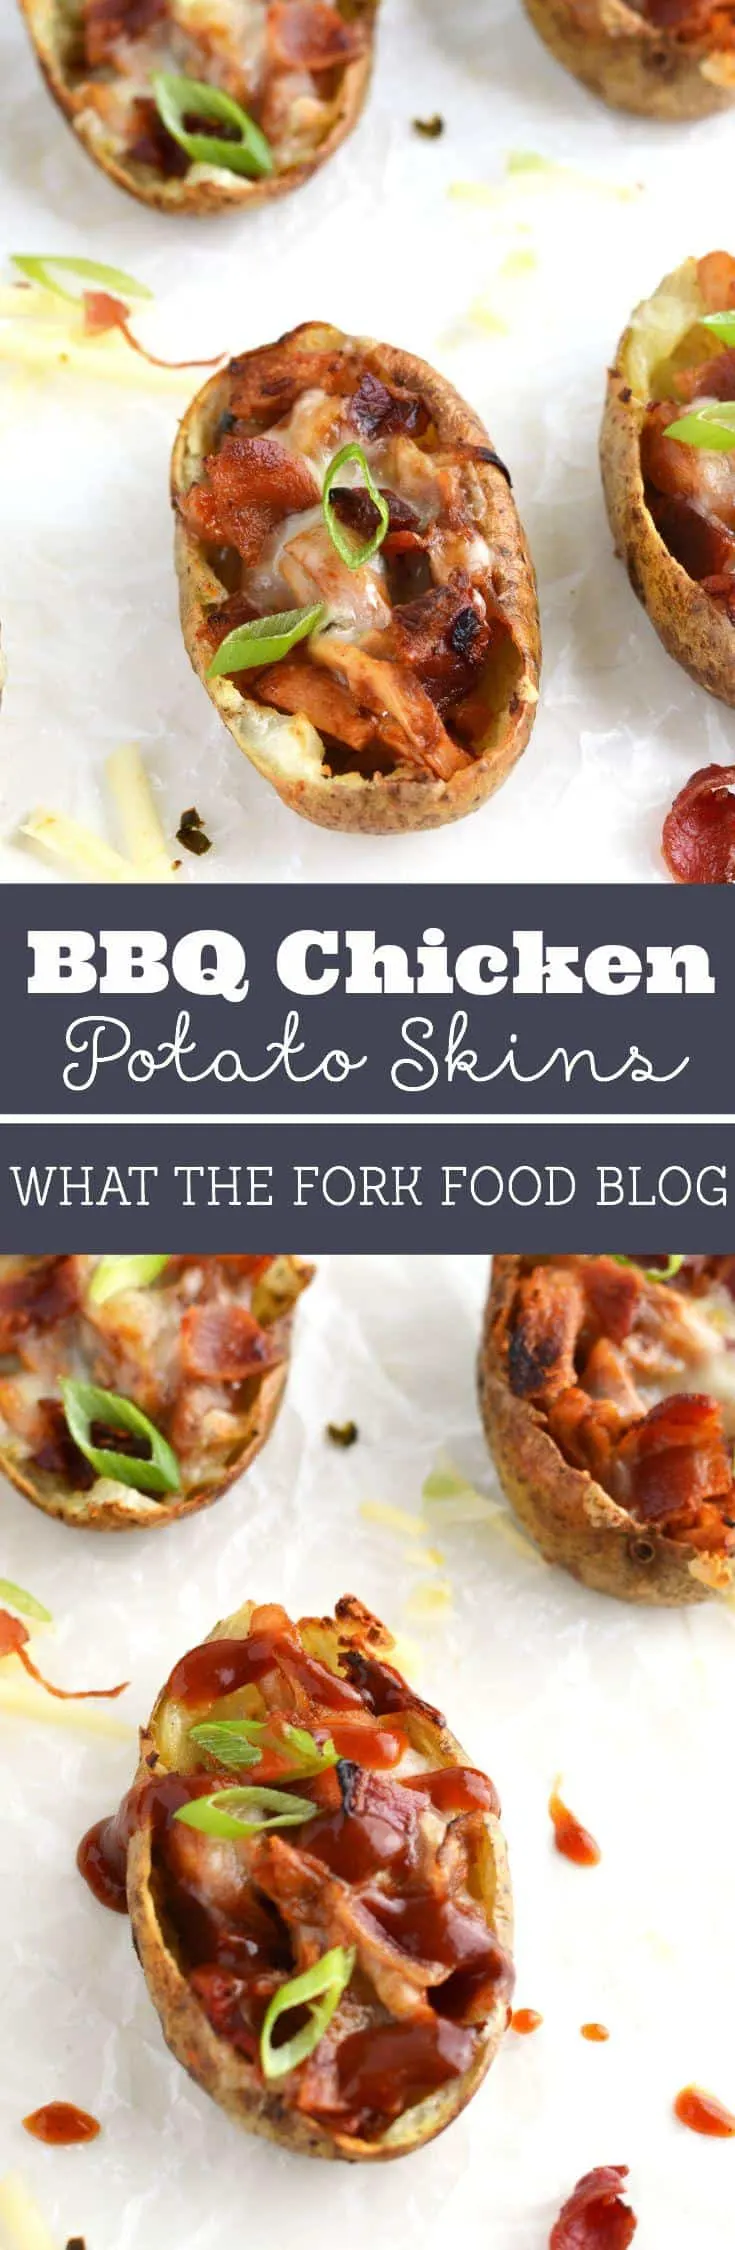 BBQ Chicken Potato Skins from What The Fork Food Blog. Crispy potato skins stuffed with smoky bbq chicken and topped with pepper jack cheese, bacon and scallions. | @WhatTheForkBlog | whattheforkfoodblog.com